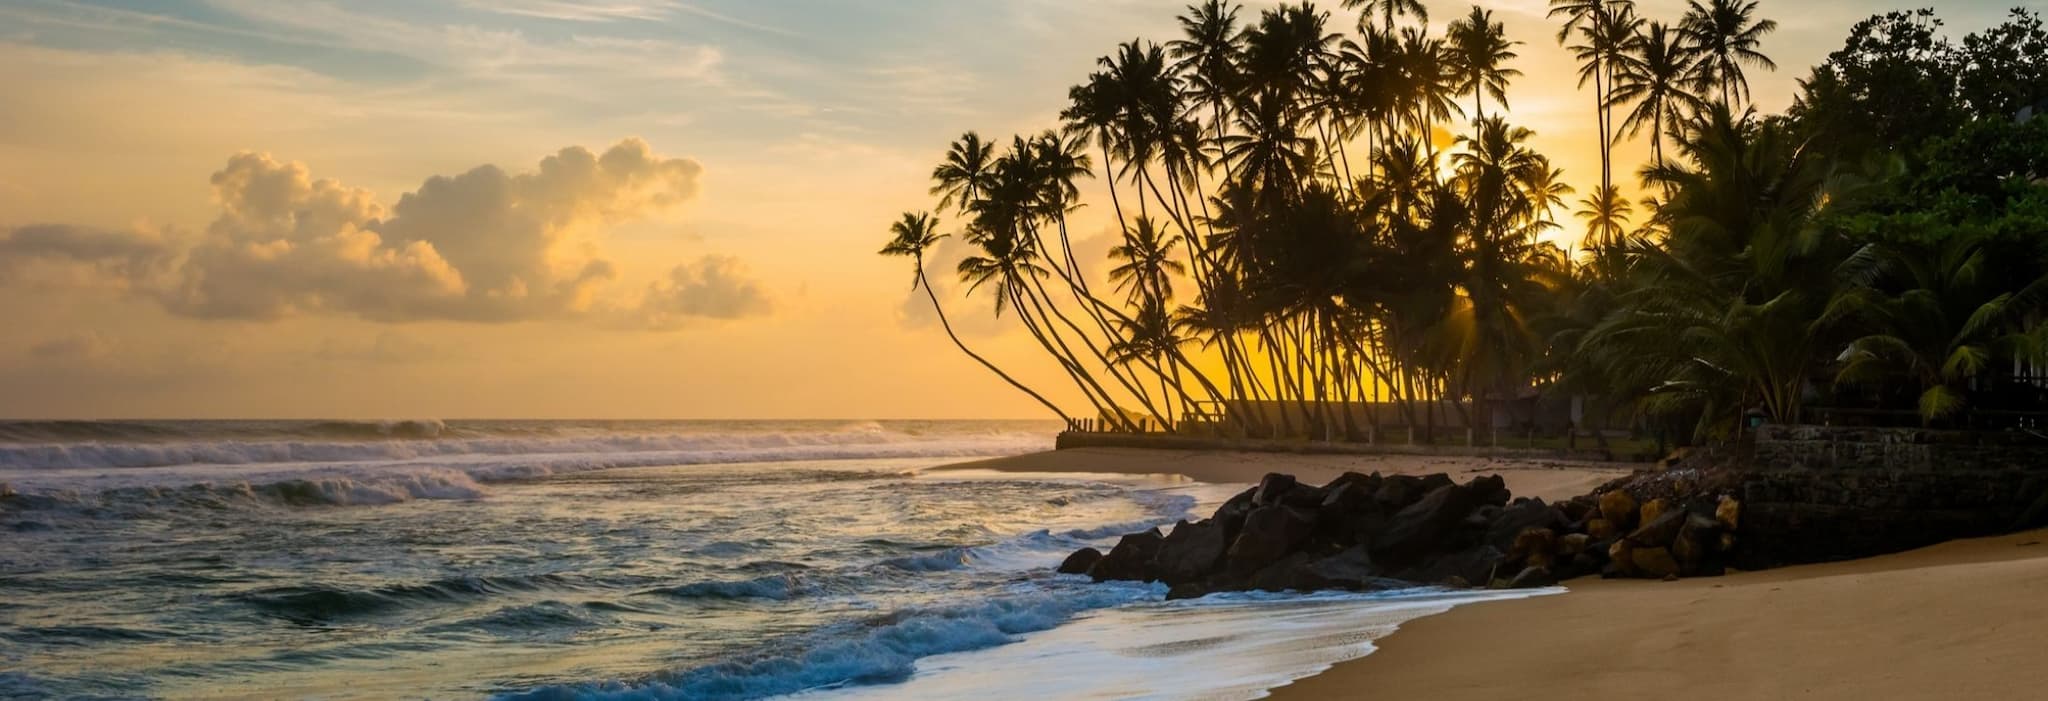 7 Facts About Sri Lanka That You Didn’t Know